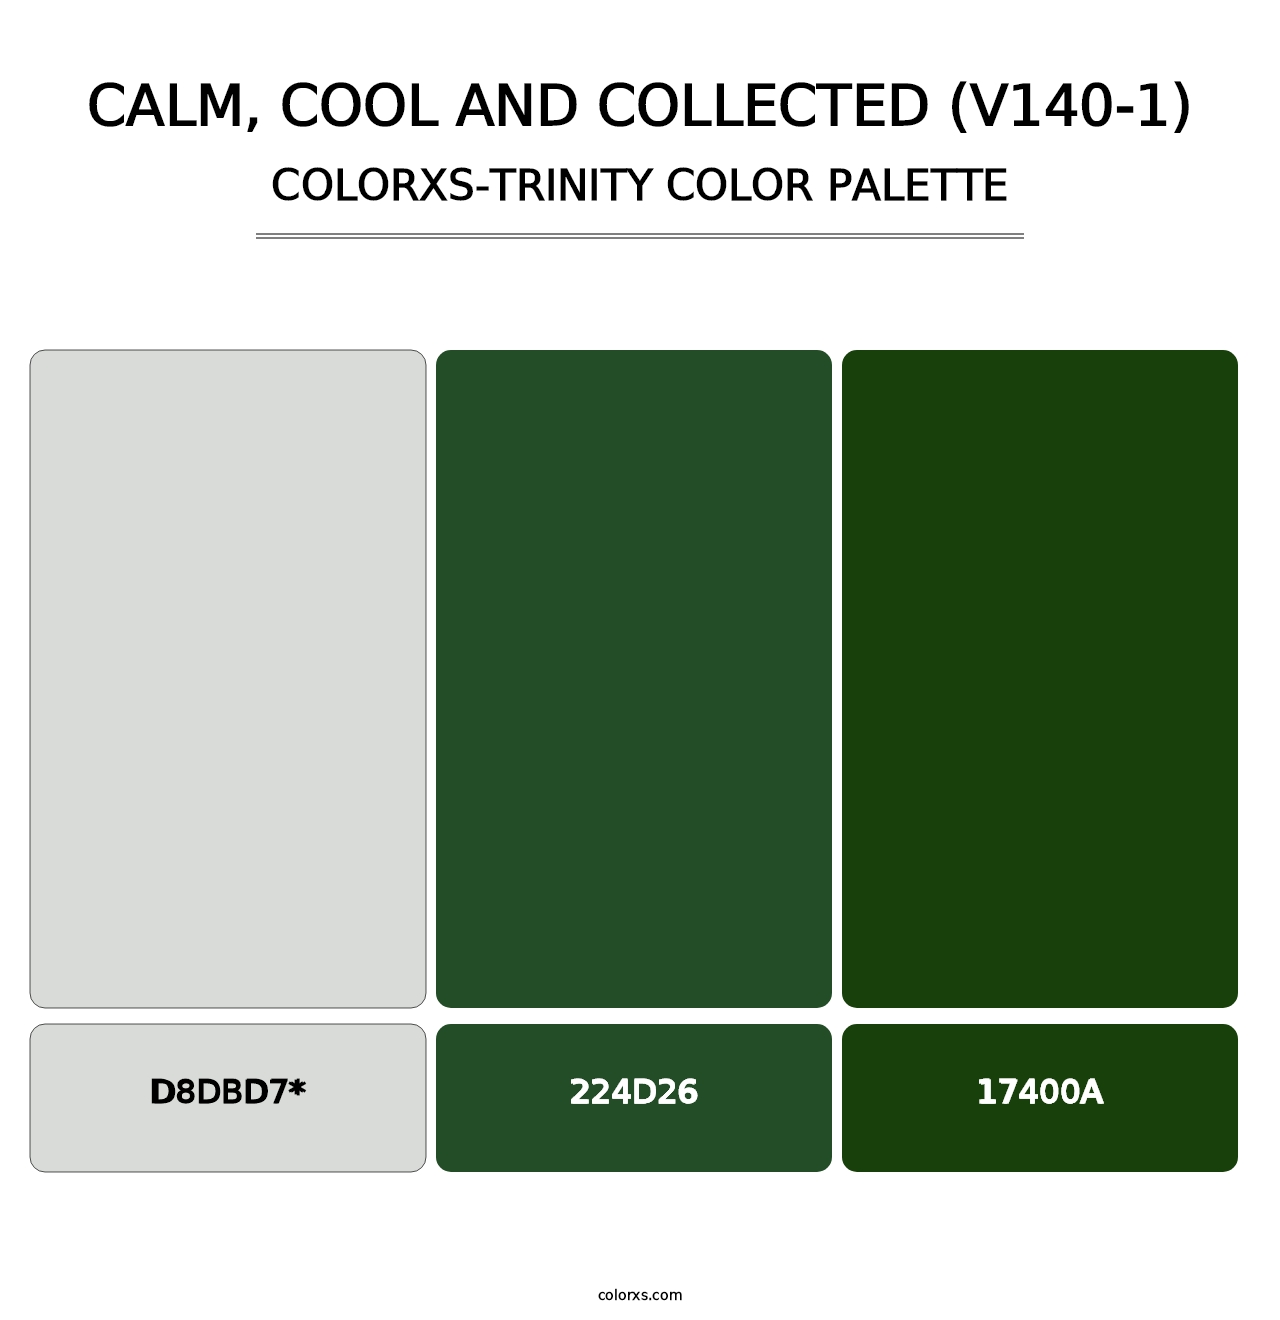 Calm, Cool and Collected (V140-1) - Colorxs Trinity Palette